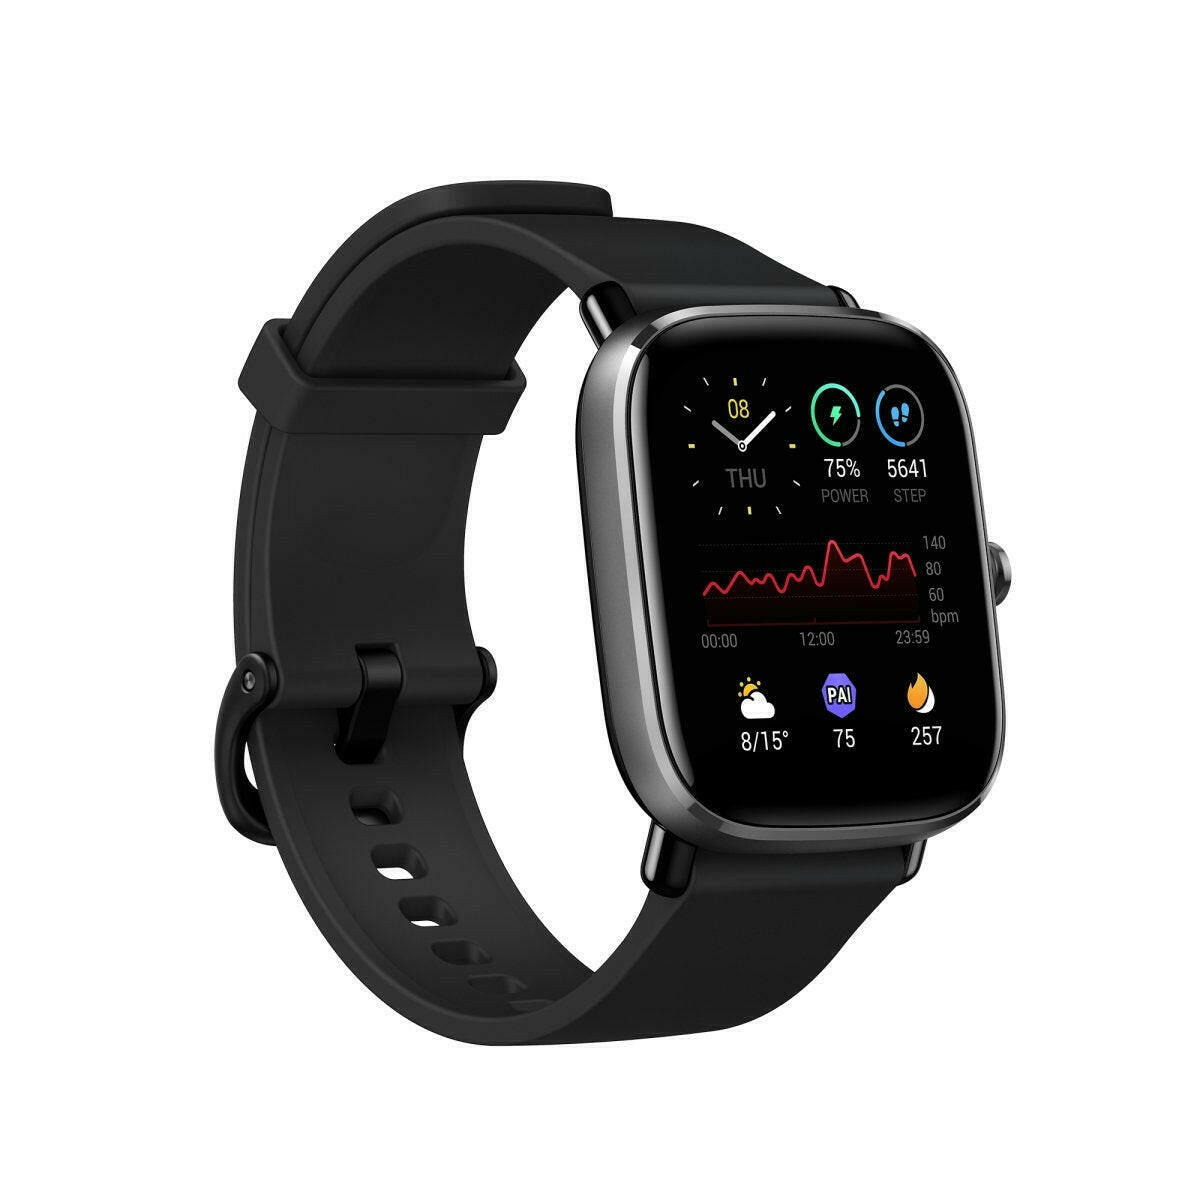 Amazfit GTS 2 mini goes on pre-order in India for ₹6,999